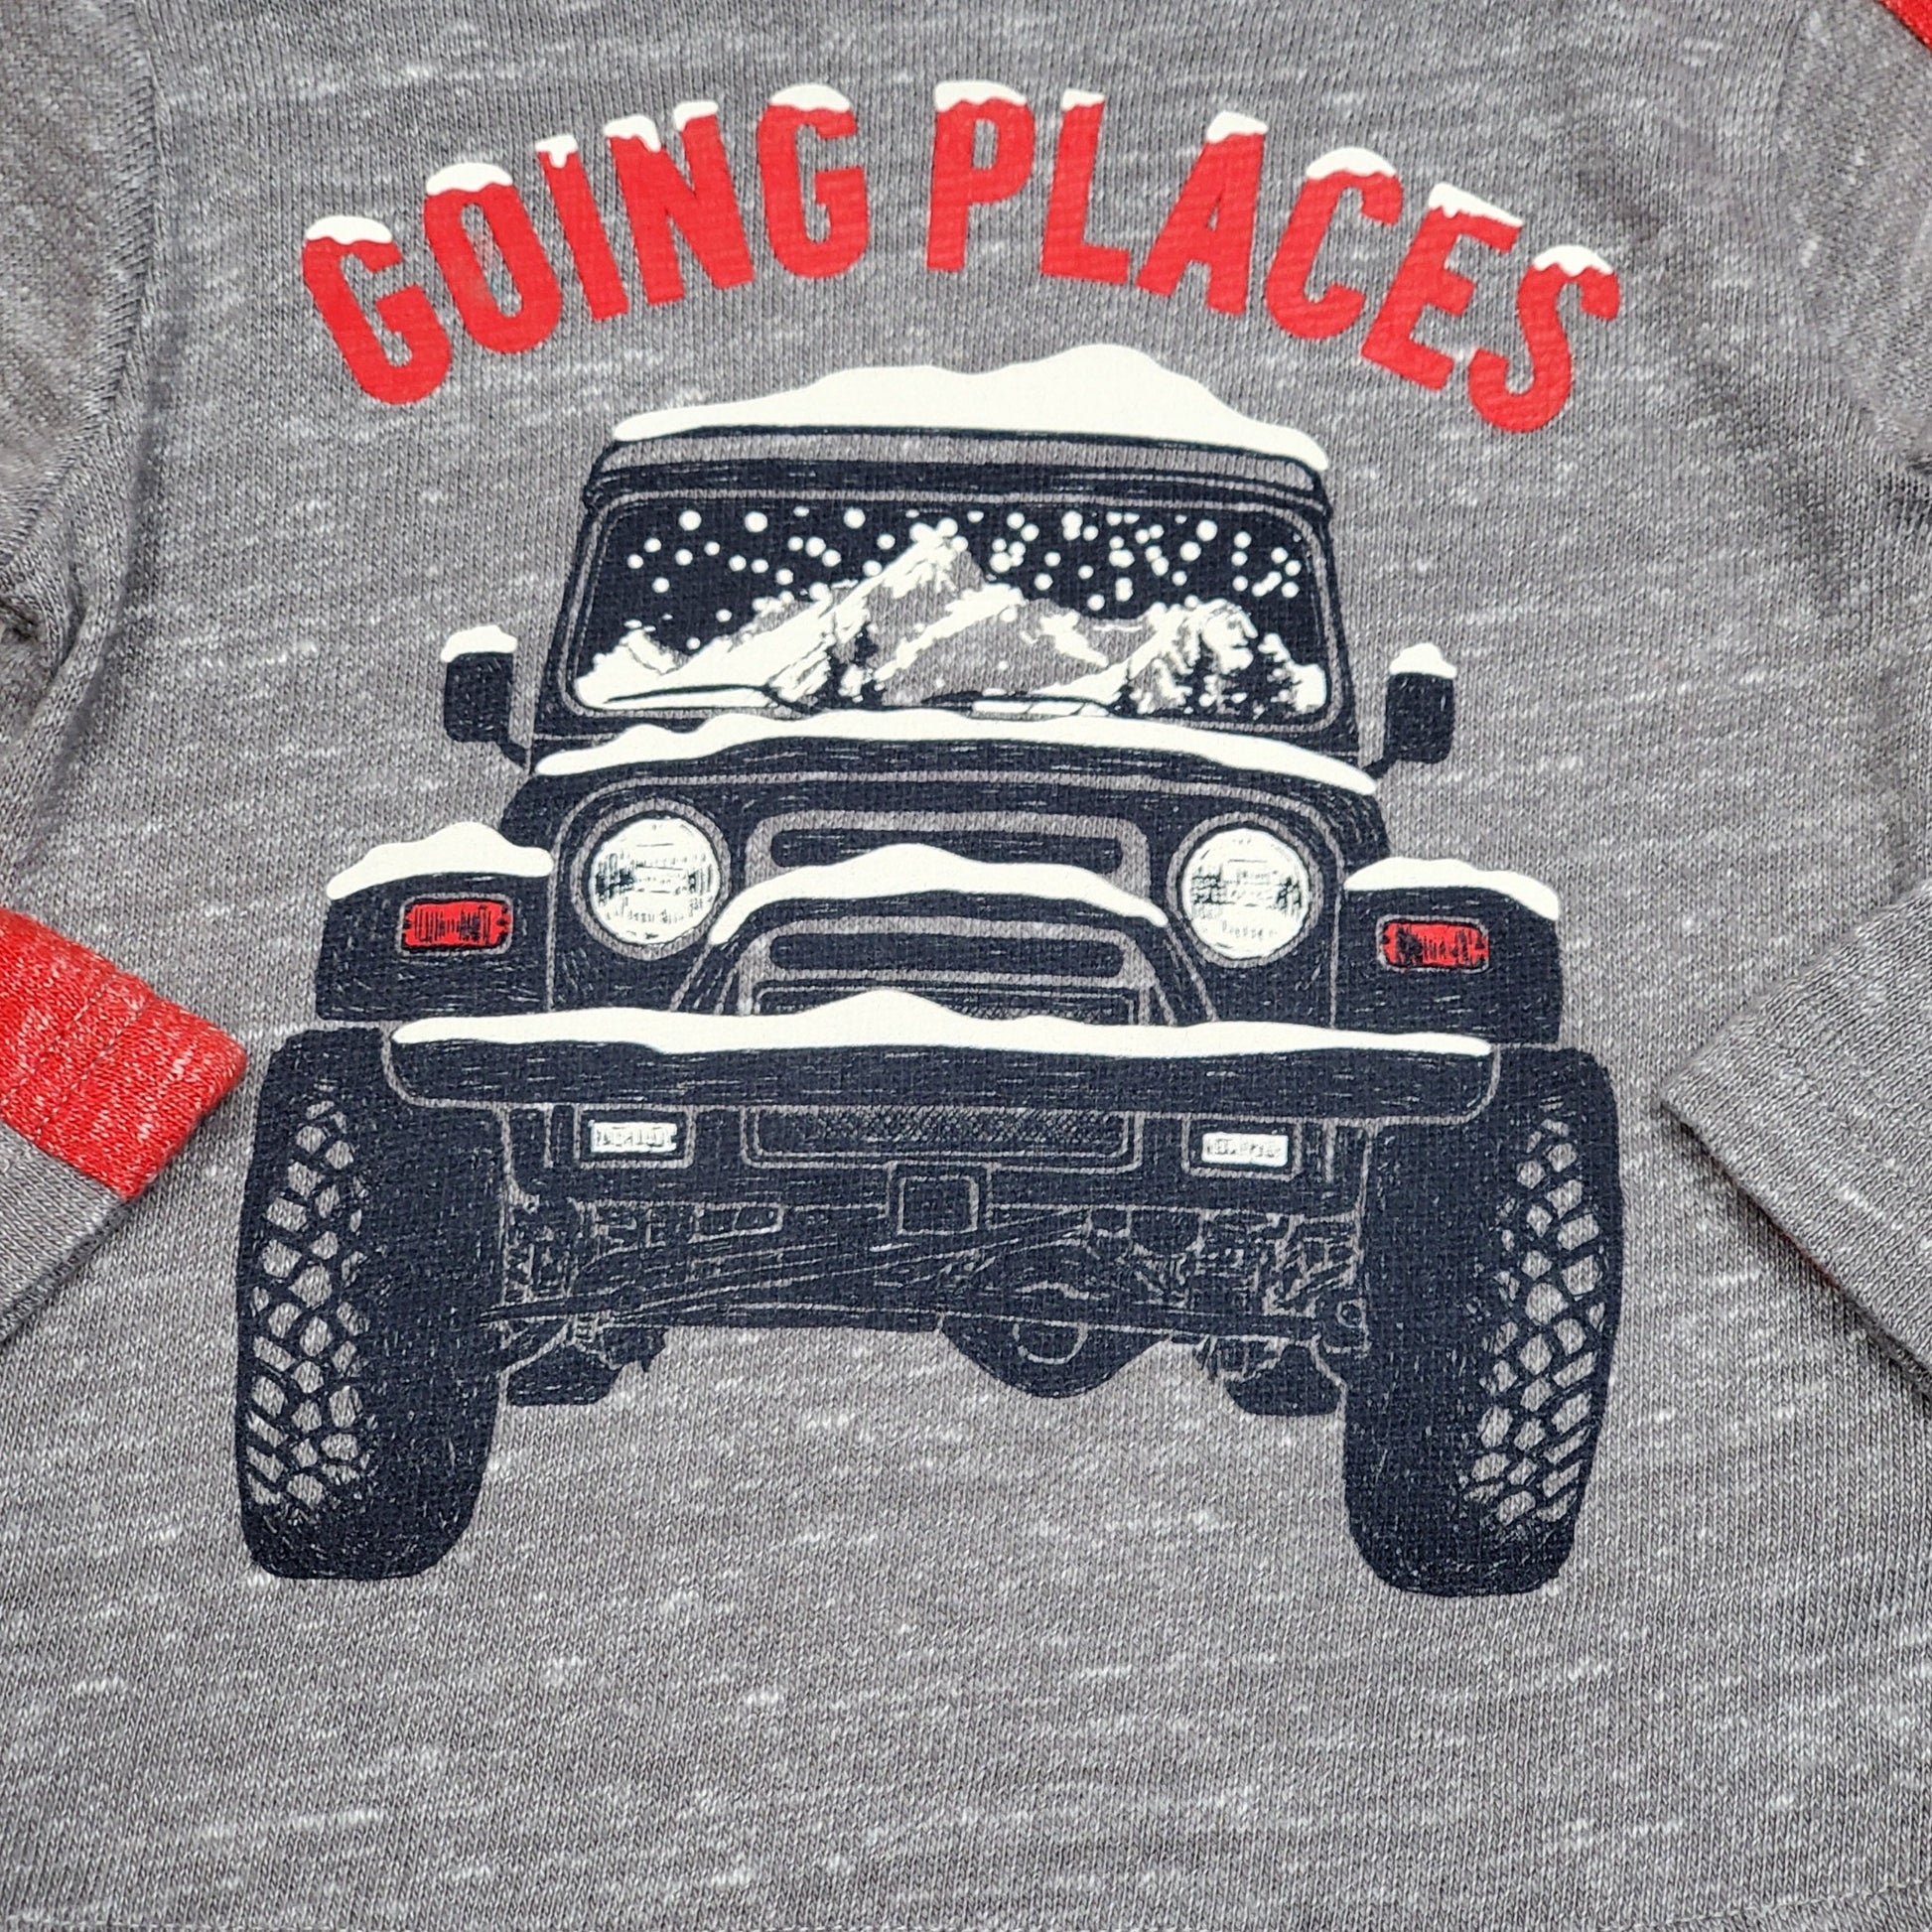 Baby Gap Boys Jeep Graphic Shirt 18M Used, close-up details